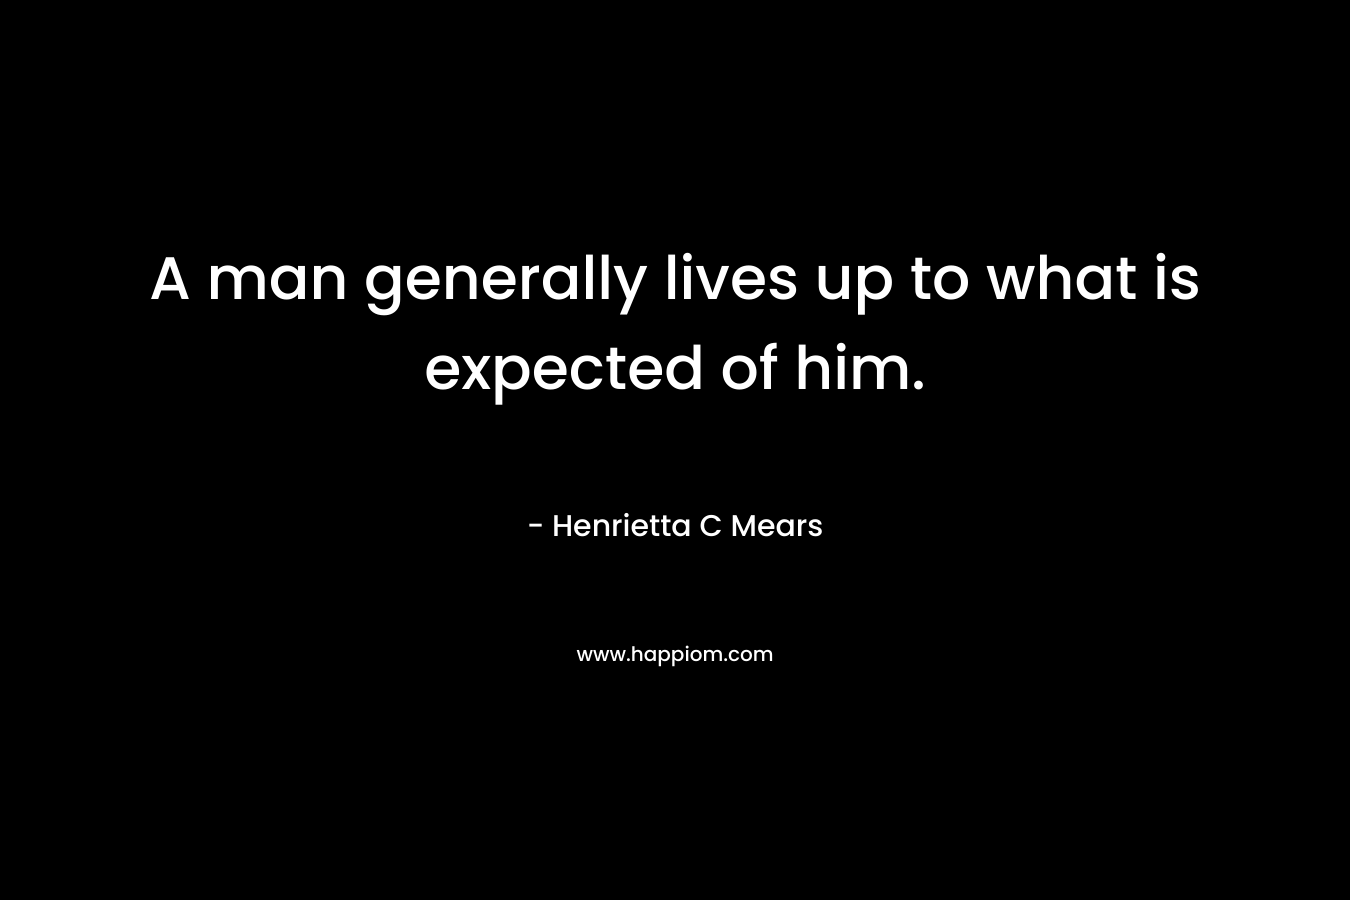 A man generally lives up to what is expected of him.